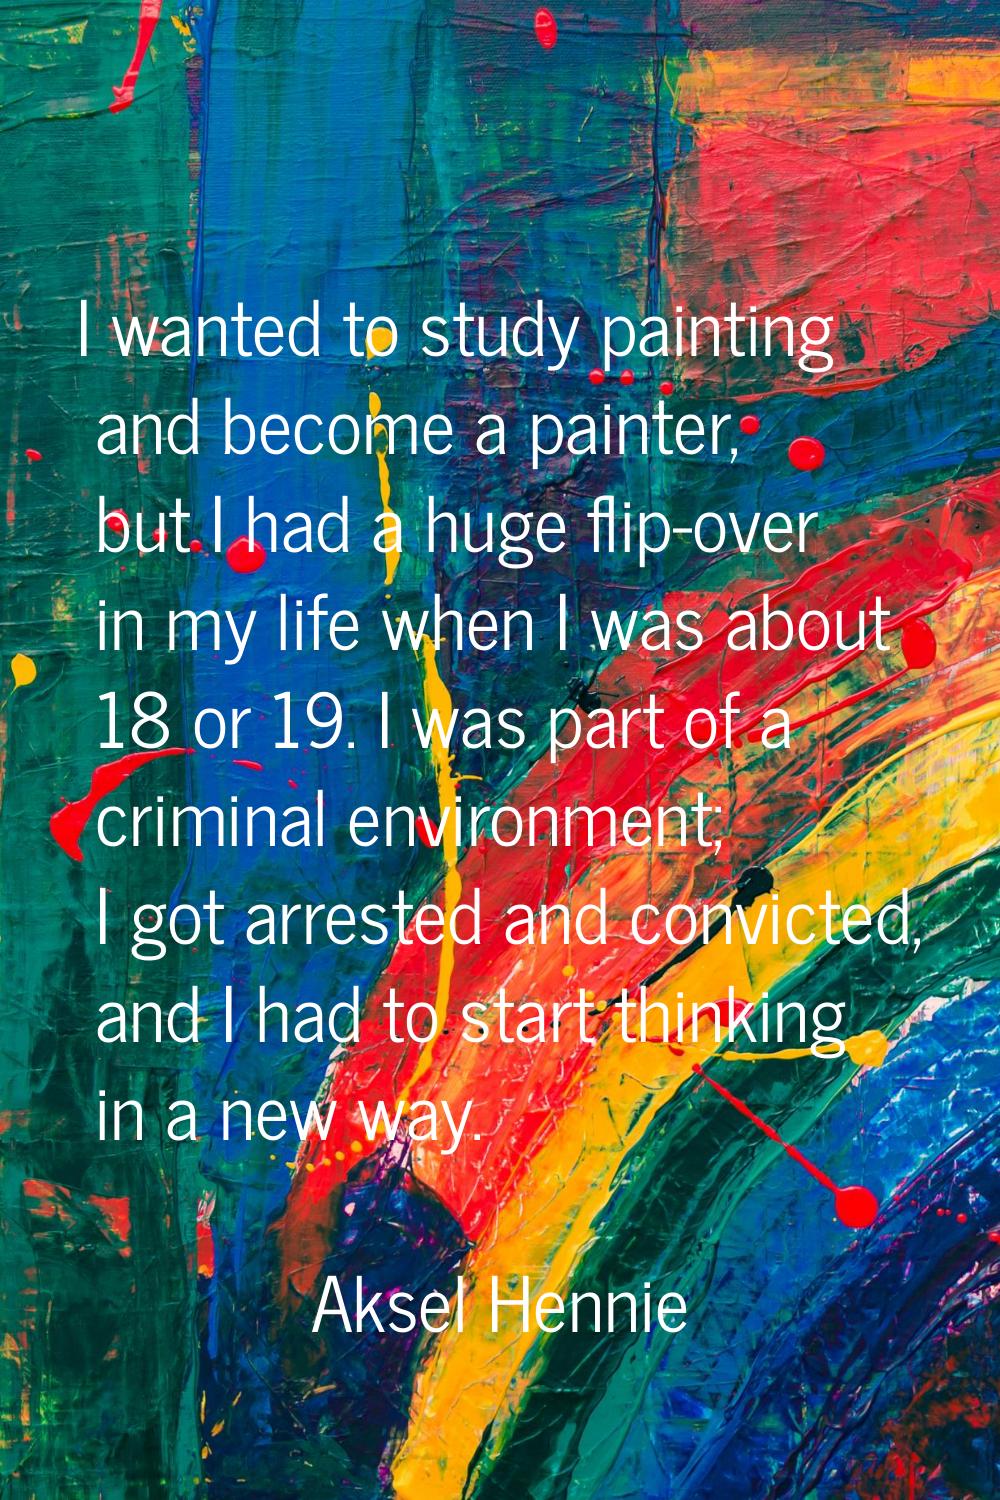 I wanted to study painting and become a painter, but I had a huge flip-over in my life when I was a